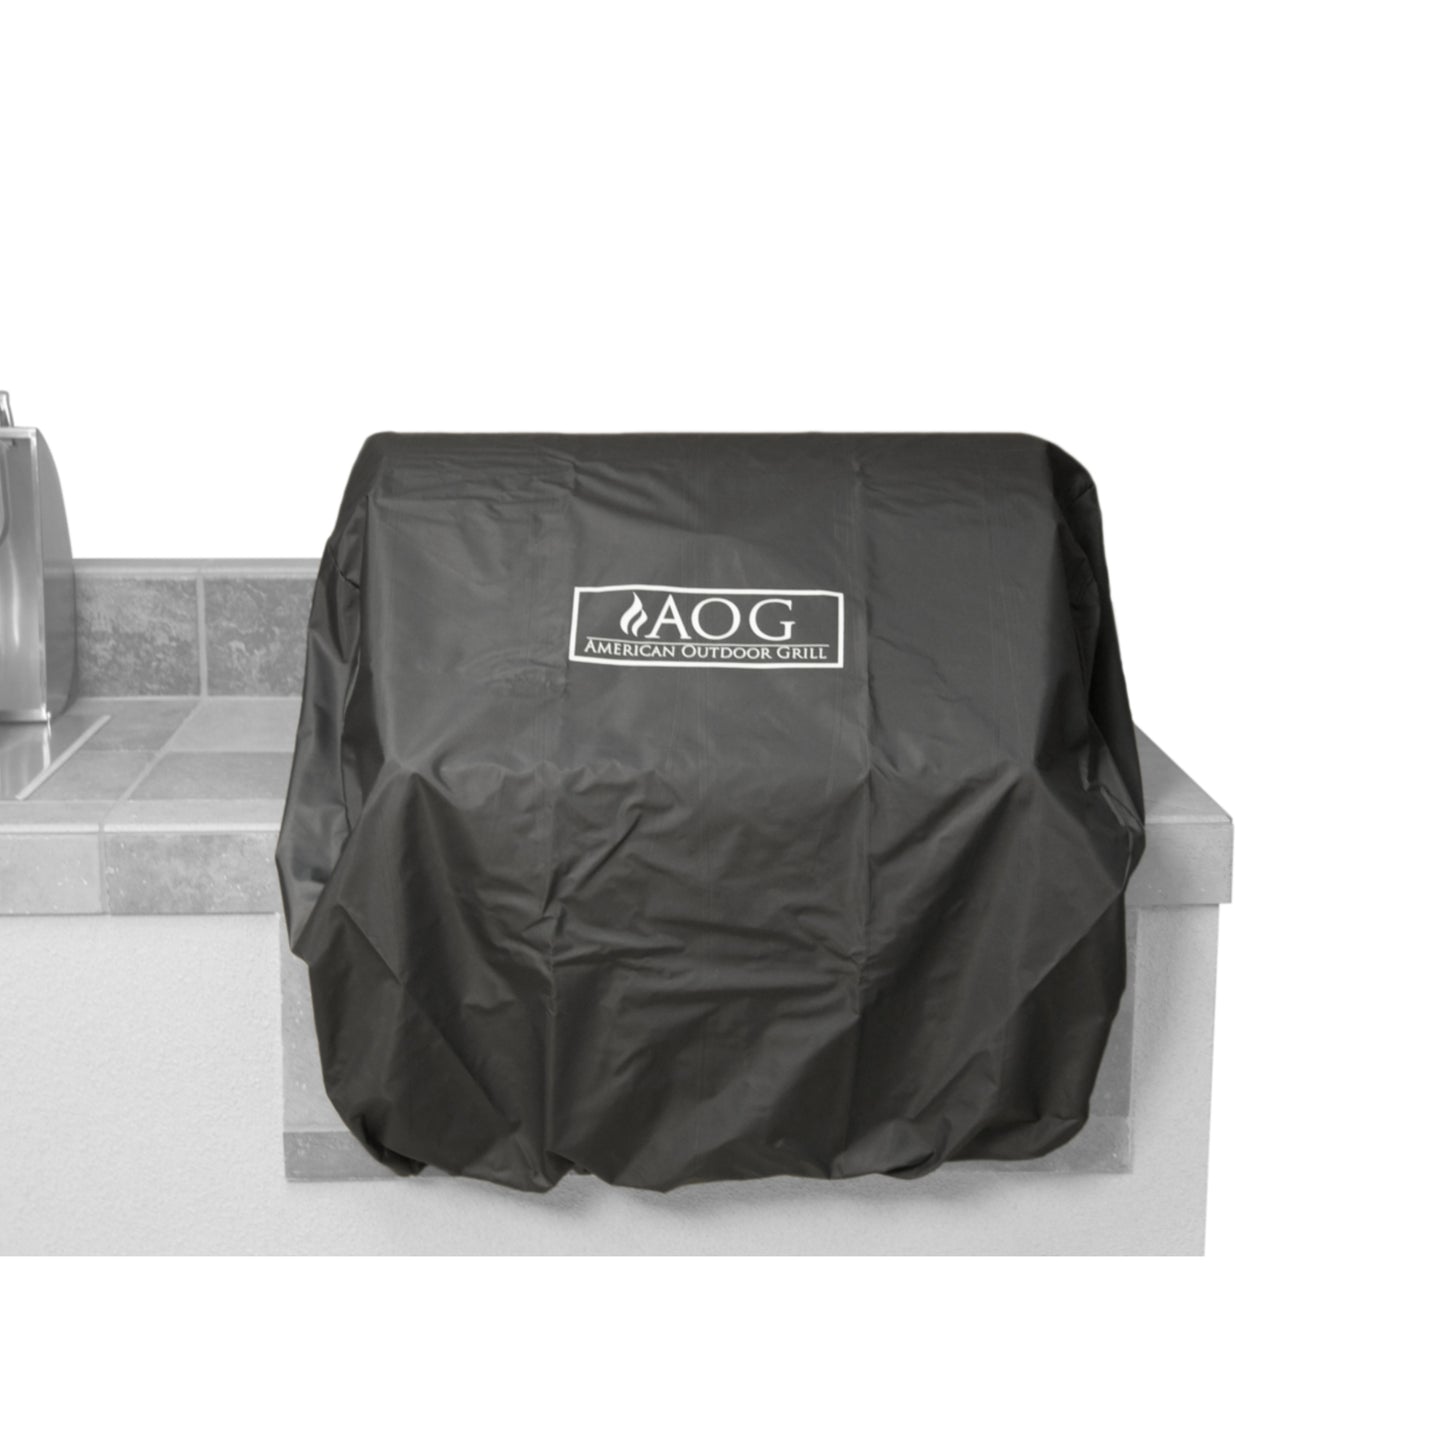 24" American Outdoor Grill (AOG) Grill Cover, Built-In CB24-D